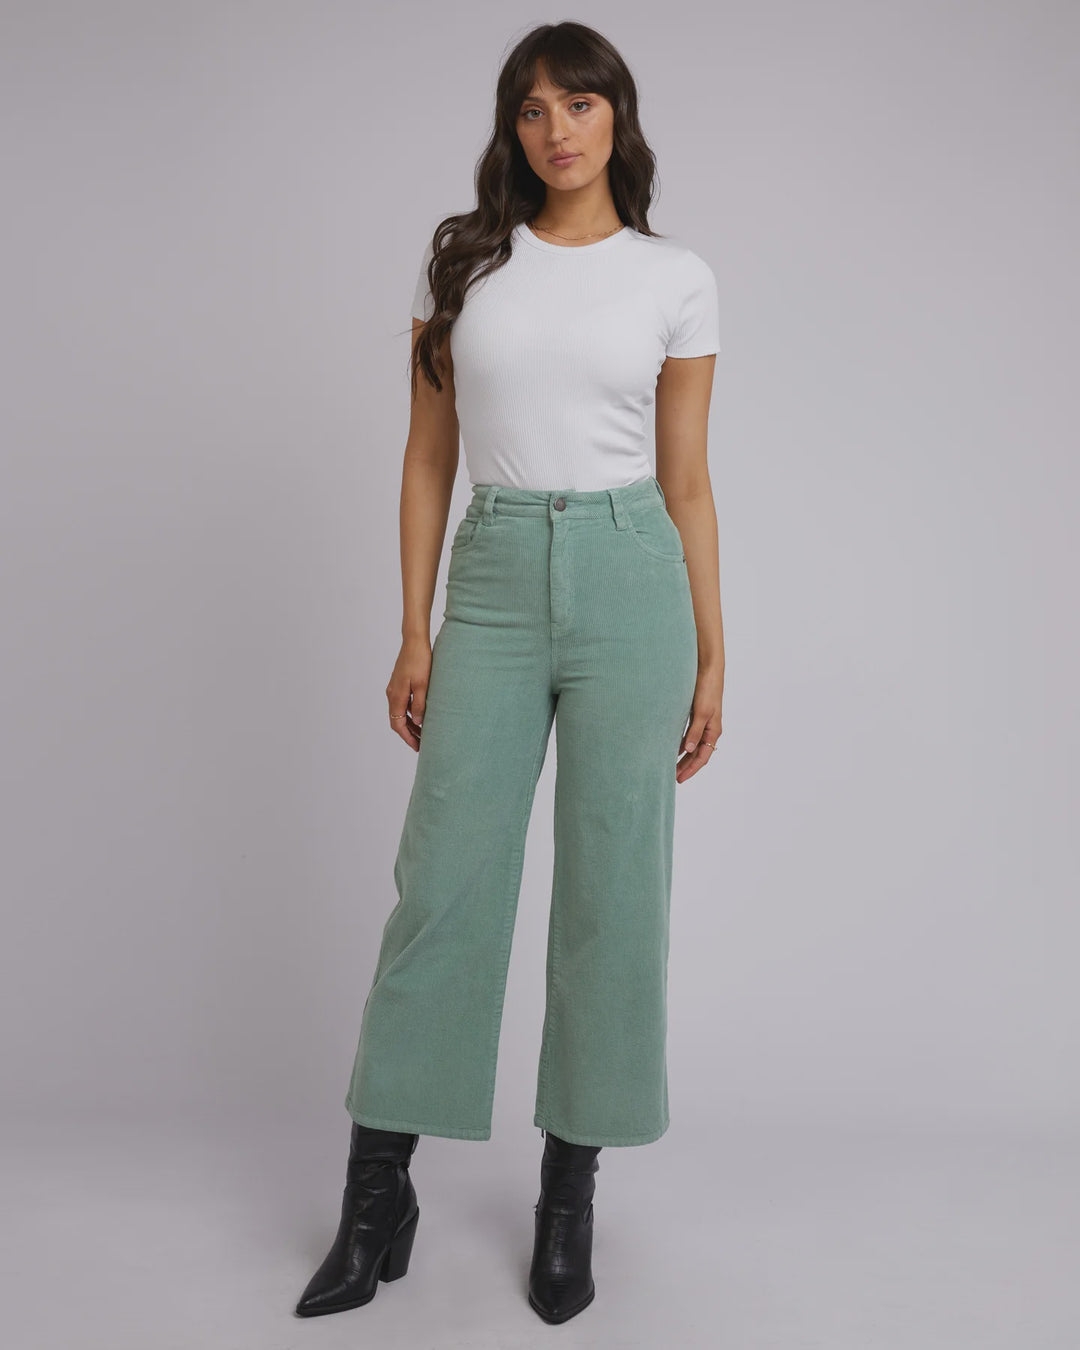 All About Eve Camilla Cord Pant- Sage